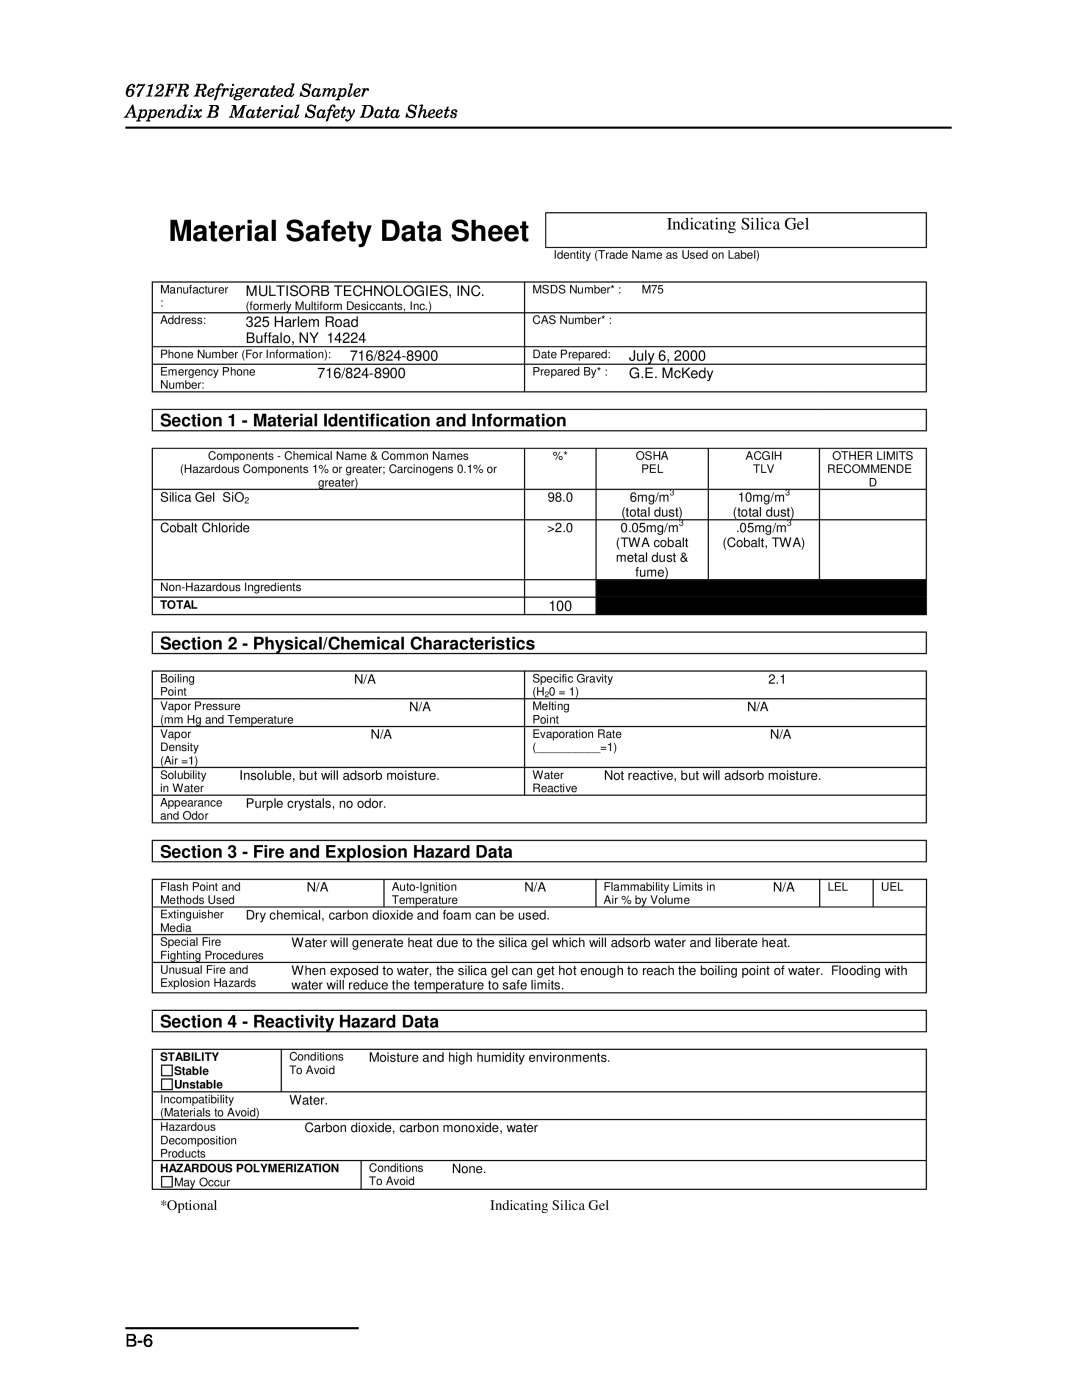 Teledyne 6712FR Refrigerated Sampler Appendix B Material Safety Data Sheets, Physical/Chemical Characteristics 